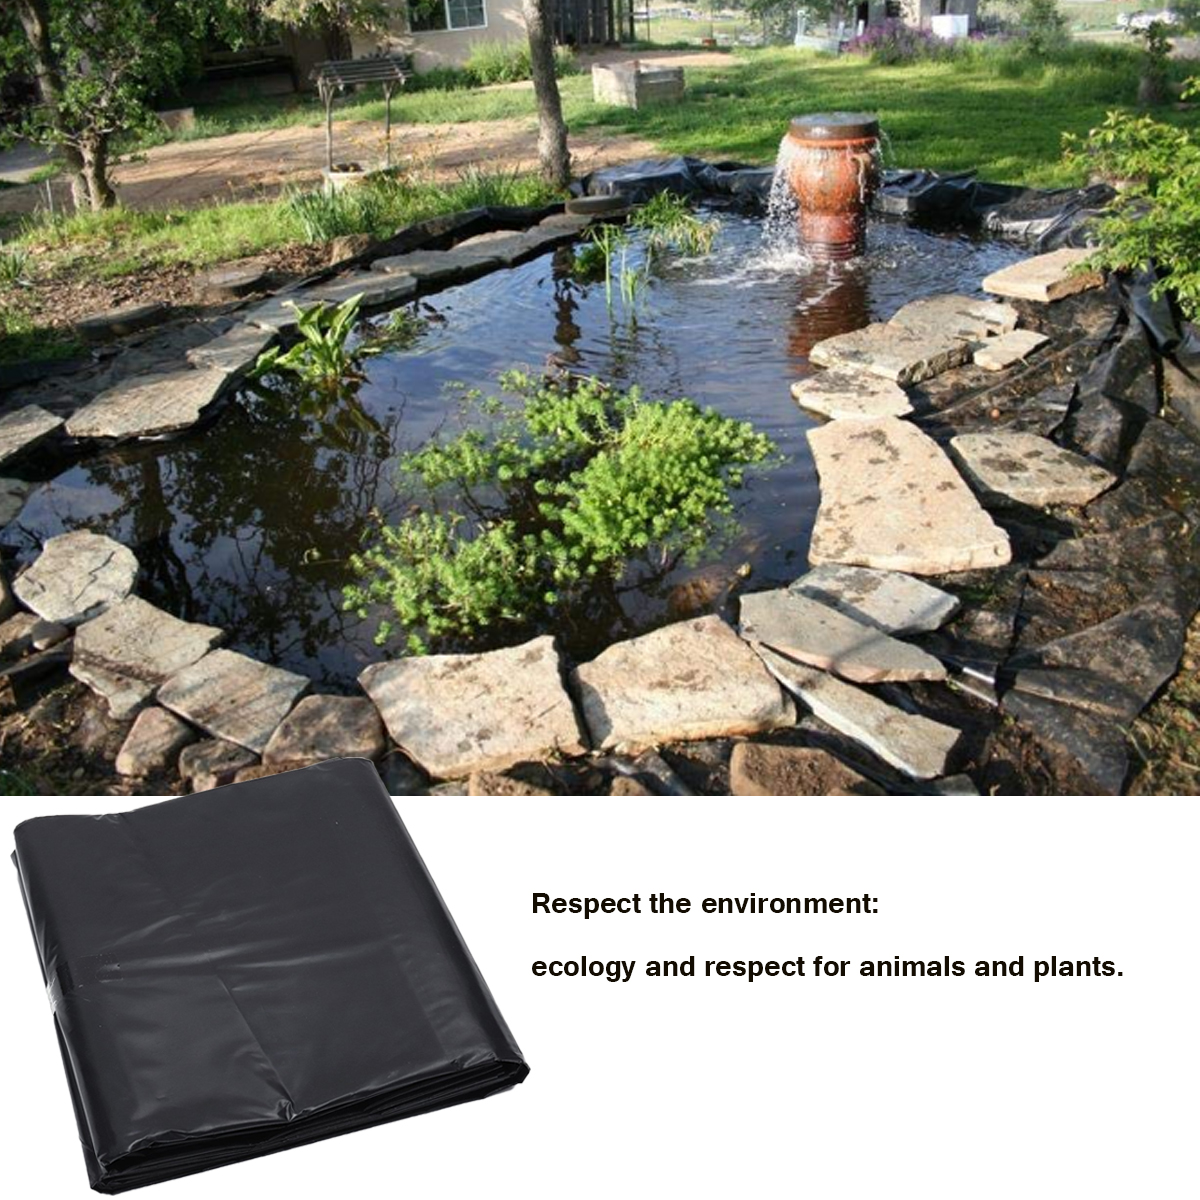 Fish Pond Liners Impermeable Membrane Waterproof Garden Landscaping Pools Membrane